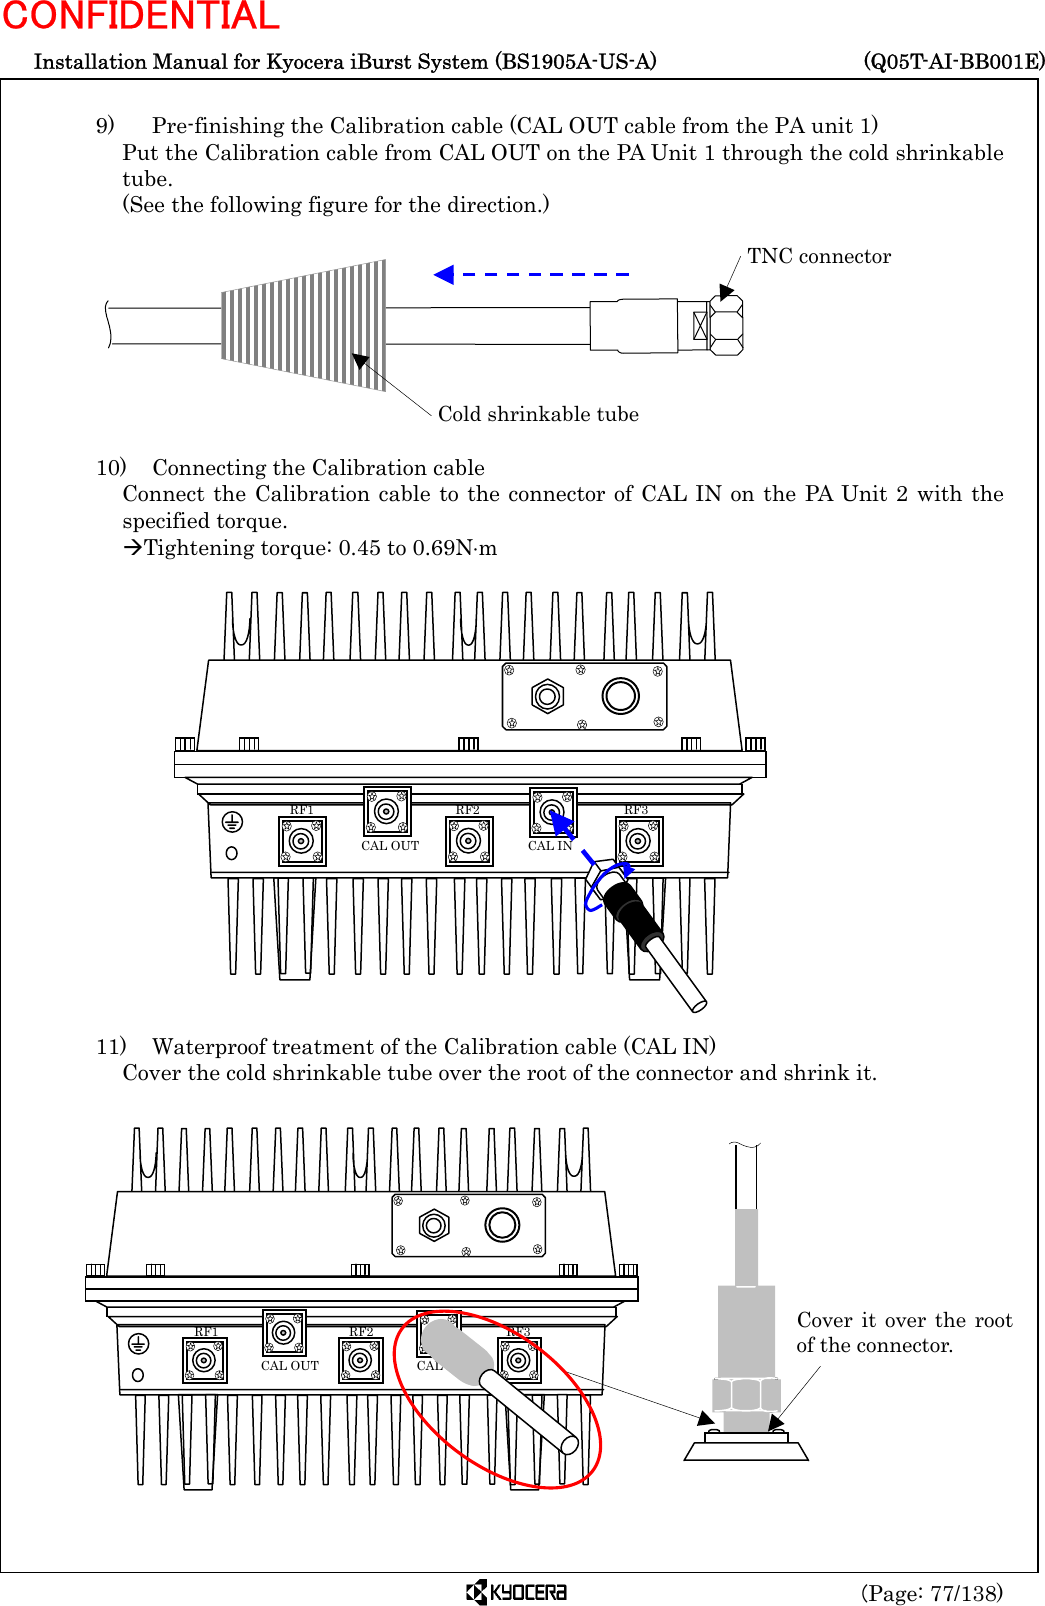  Installation Manual for Kyocera iBurst System (BS1905A-US-A)     (Q05T-AI-BB001E) (Page: 77/138) CONFIDENTIAL  9)    Pre-finishing the Calibration cable (CAL OUT cable from the PA unit 1) Put the Calibration cable from CAL OUT on the PA Unit 1 through the cold shrinkable tube.  (See the following figure for the direction.)          10)    Connecting the Calibration cable Connect the Calibration cable to the connector of CAL IN on the PA Unit 2 with the specified torque. ÆTightening torque: 0.45 to 0.69N⋅m                   11)    Waterproof treatment of the Calibration cable (CAL IN) Cover the cold shrinkable tube over the root of the connector and shrink it.                  Cold shrinkable tubeTNC connector   RF3 RF2 RF1 CAL OUT  CAL IN Cover it over the rootof the connector.    RF3 RF2 RF1 CAL OUT  CAL IN 